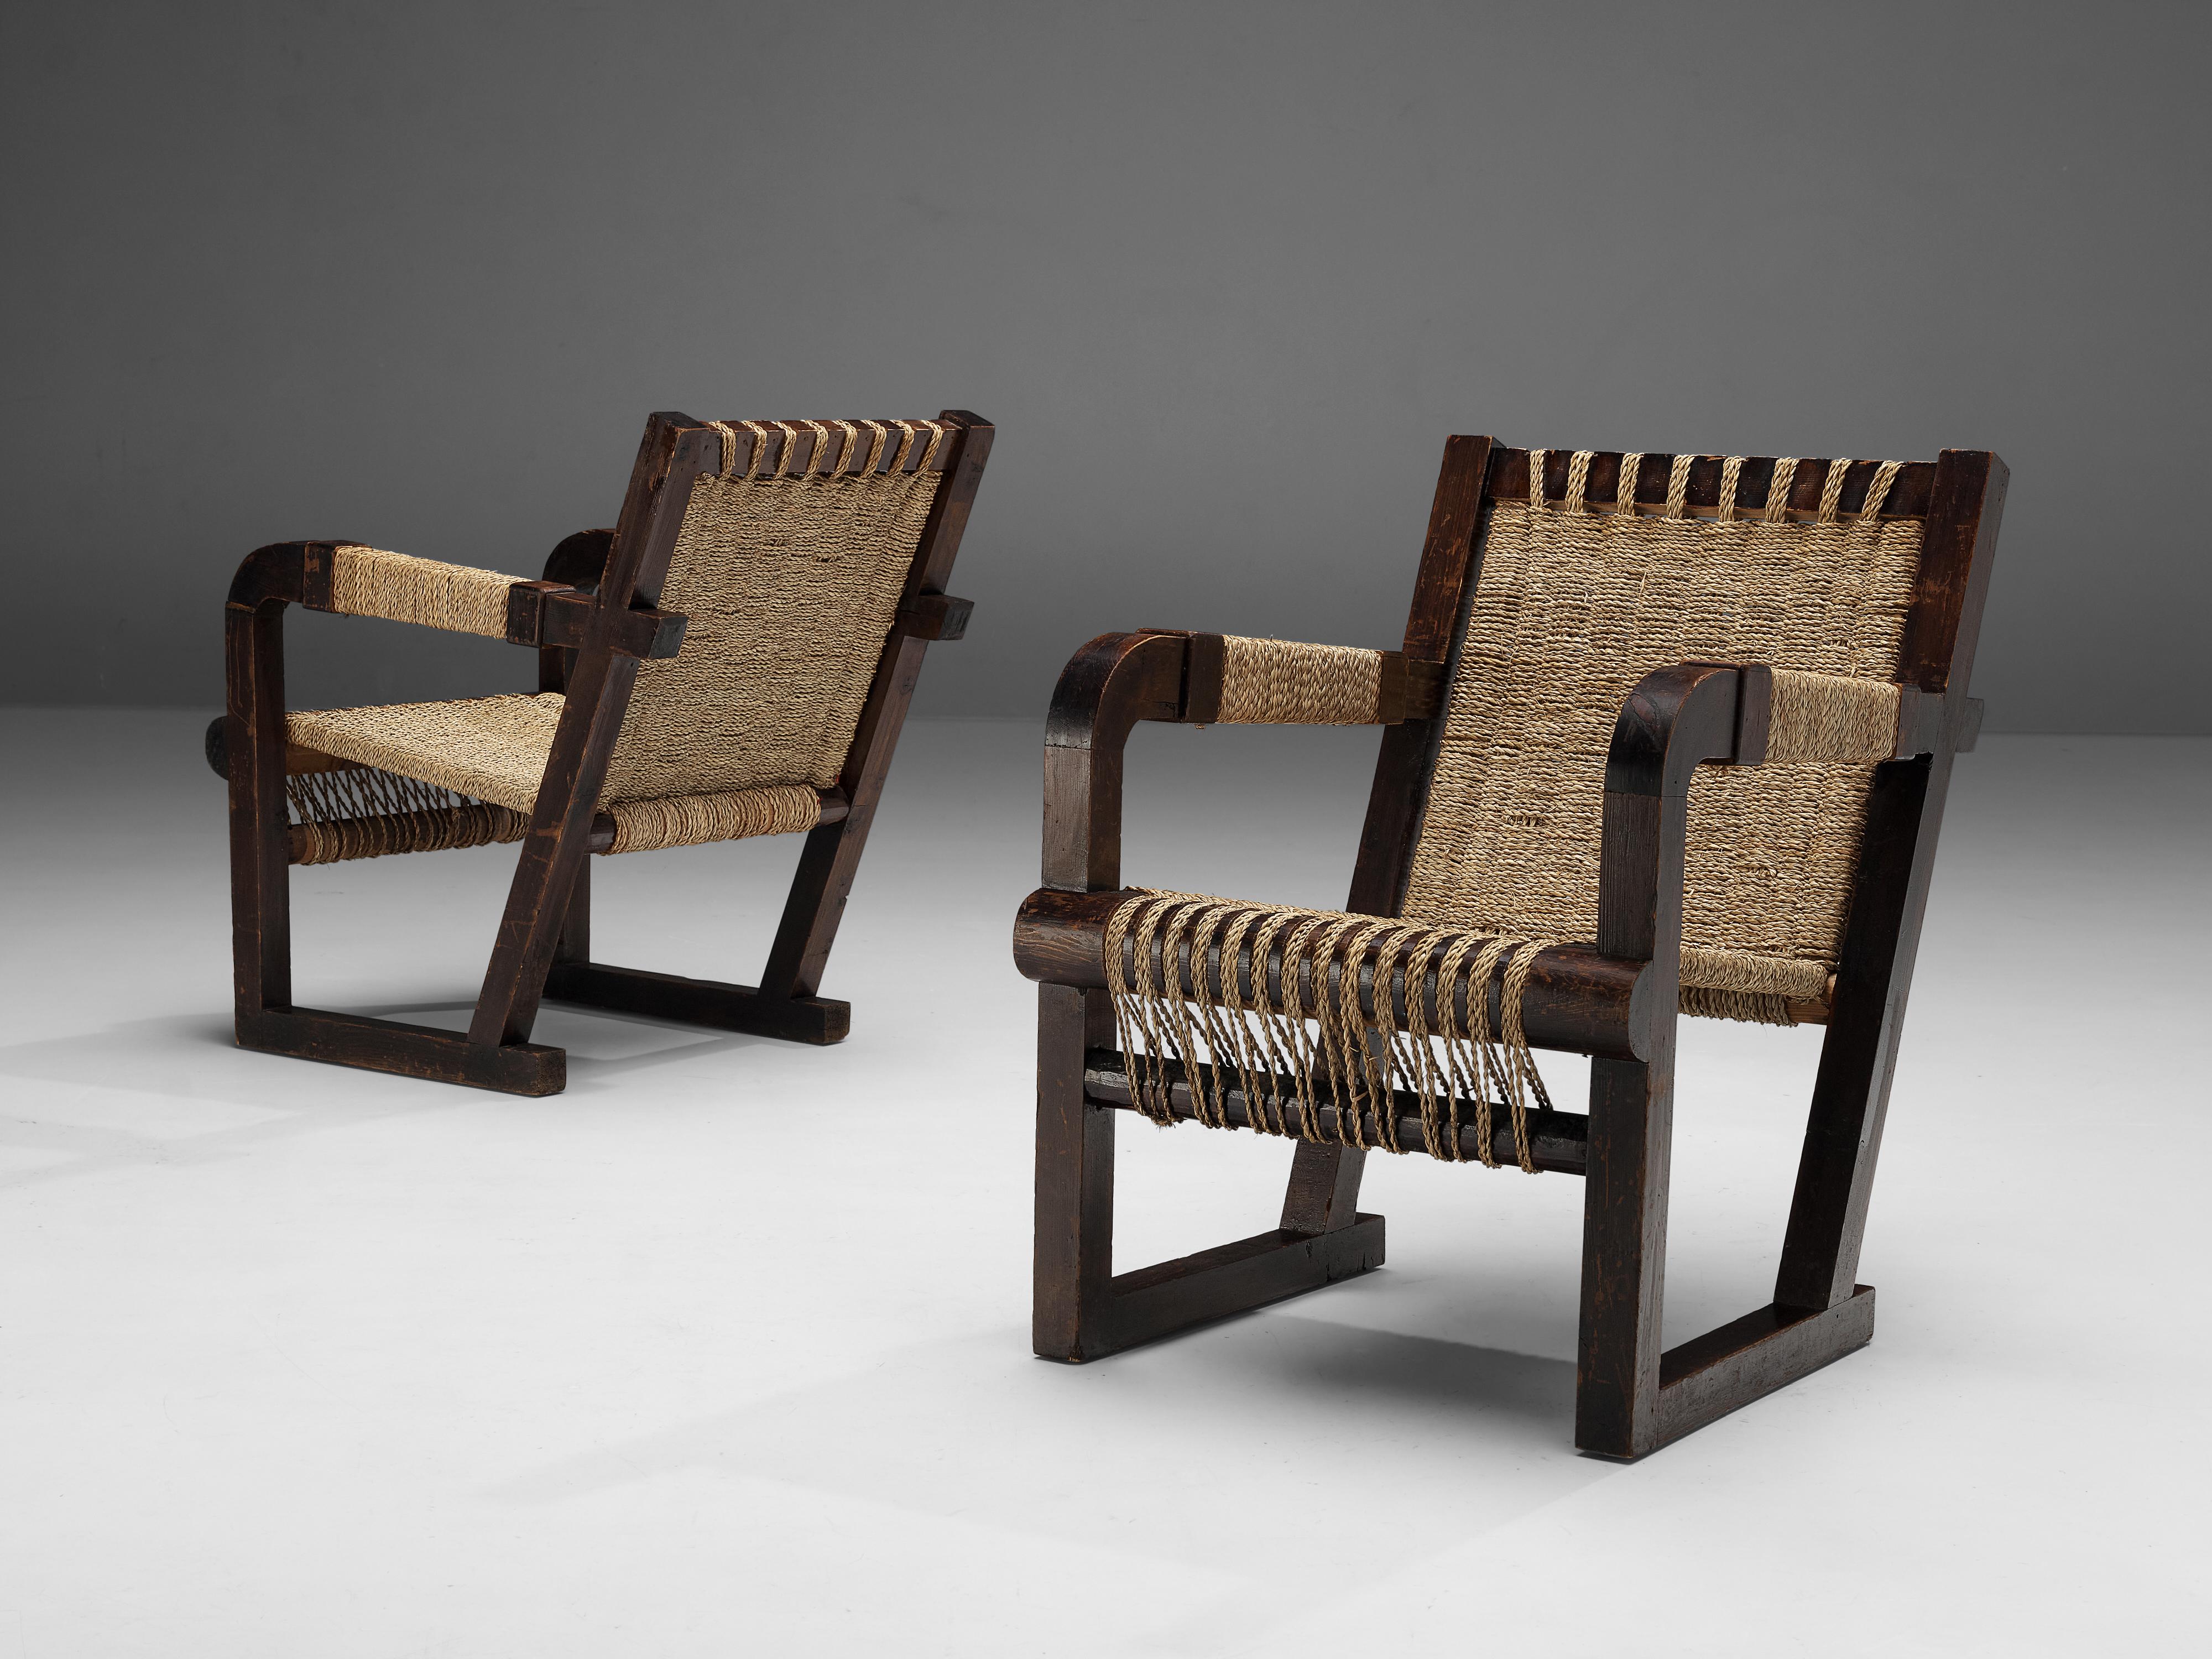 Francis Jourdain, pair of lounge chairs, pine, rope, France, 1930s

This stunning pair of lounge chairs was designed by Francis Jourdain in France around 1930. The chair show a raked back and the seat is created out of intertwined rope strings.